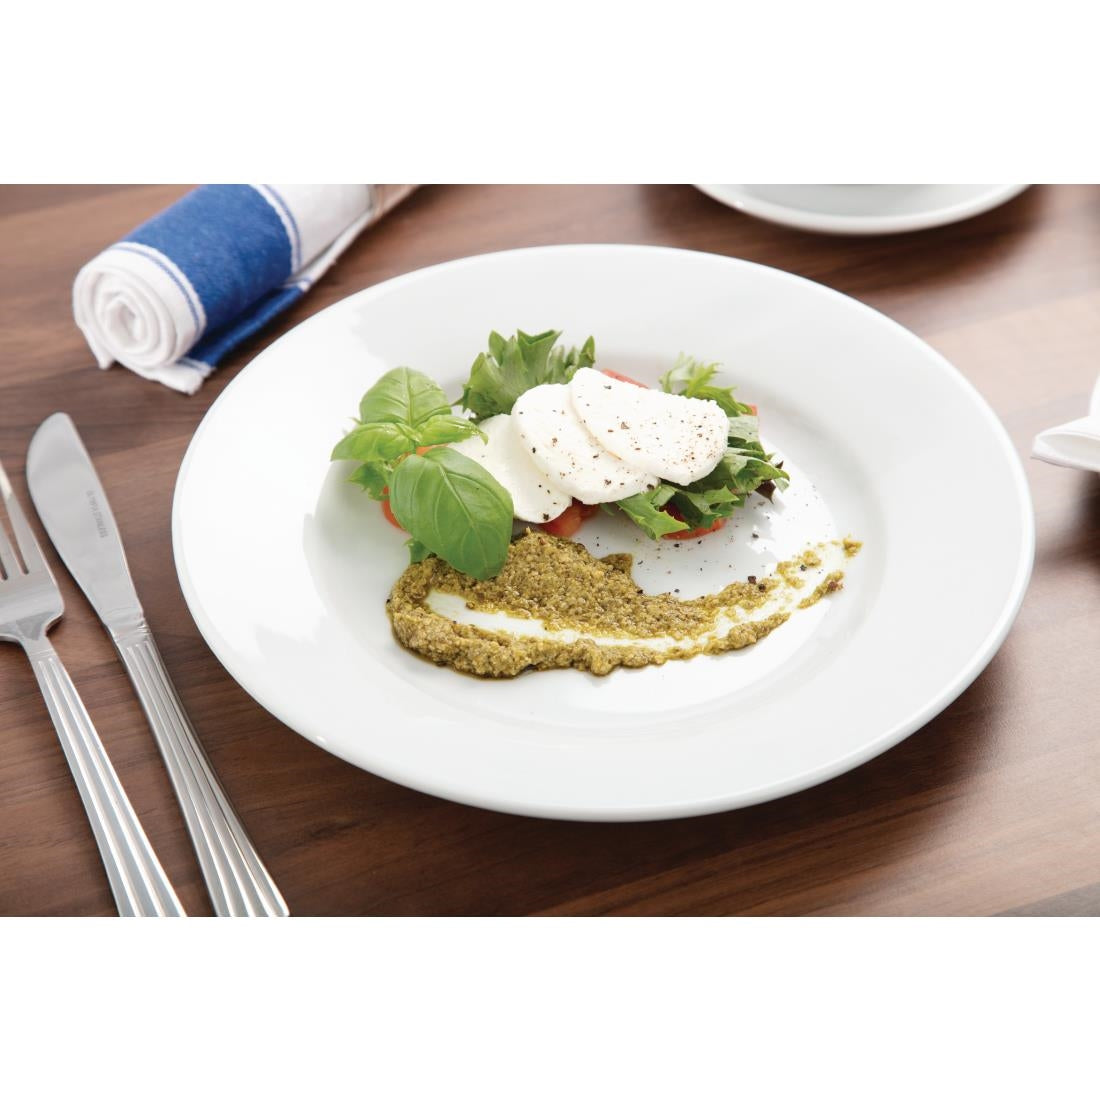 Athena Hotelware Wide Rimmed Plates 254mm (Pack of 12) JD Catering Equipment Solutions Ltd